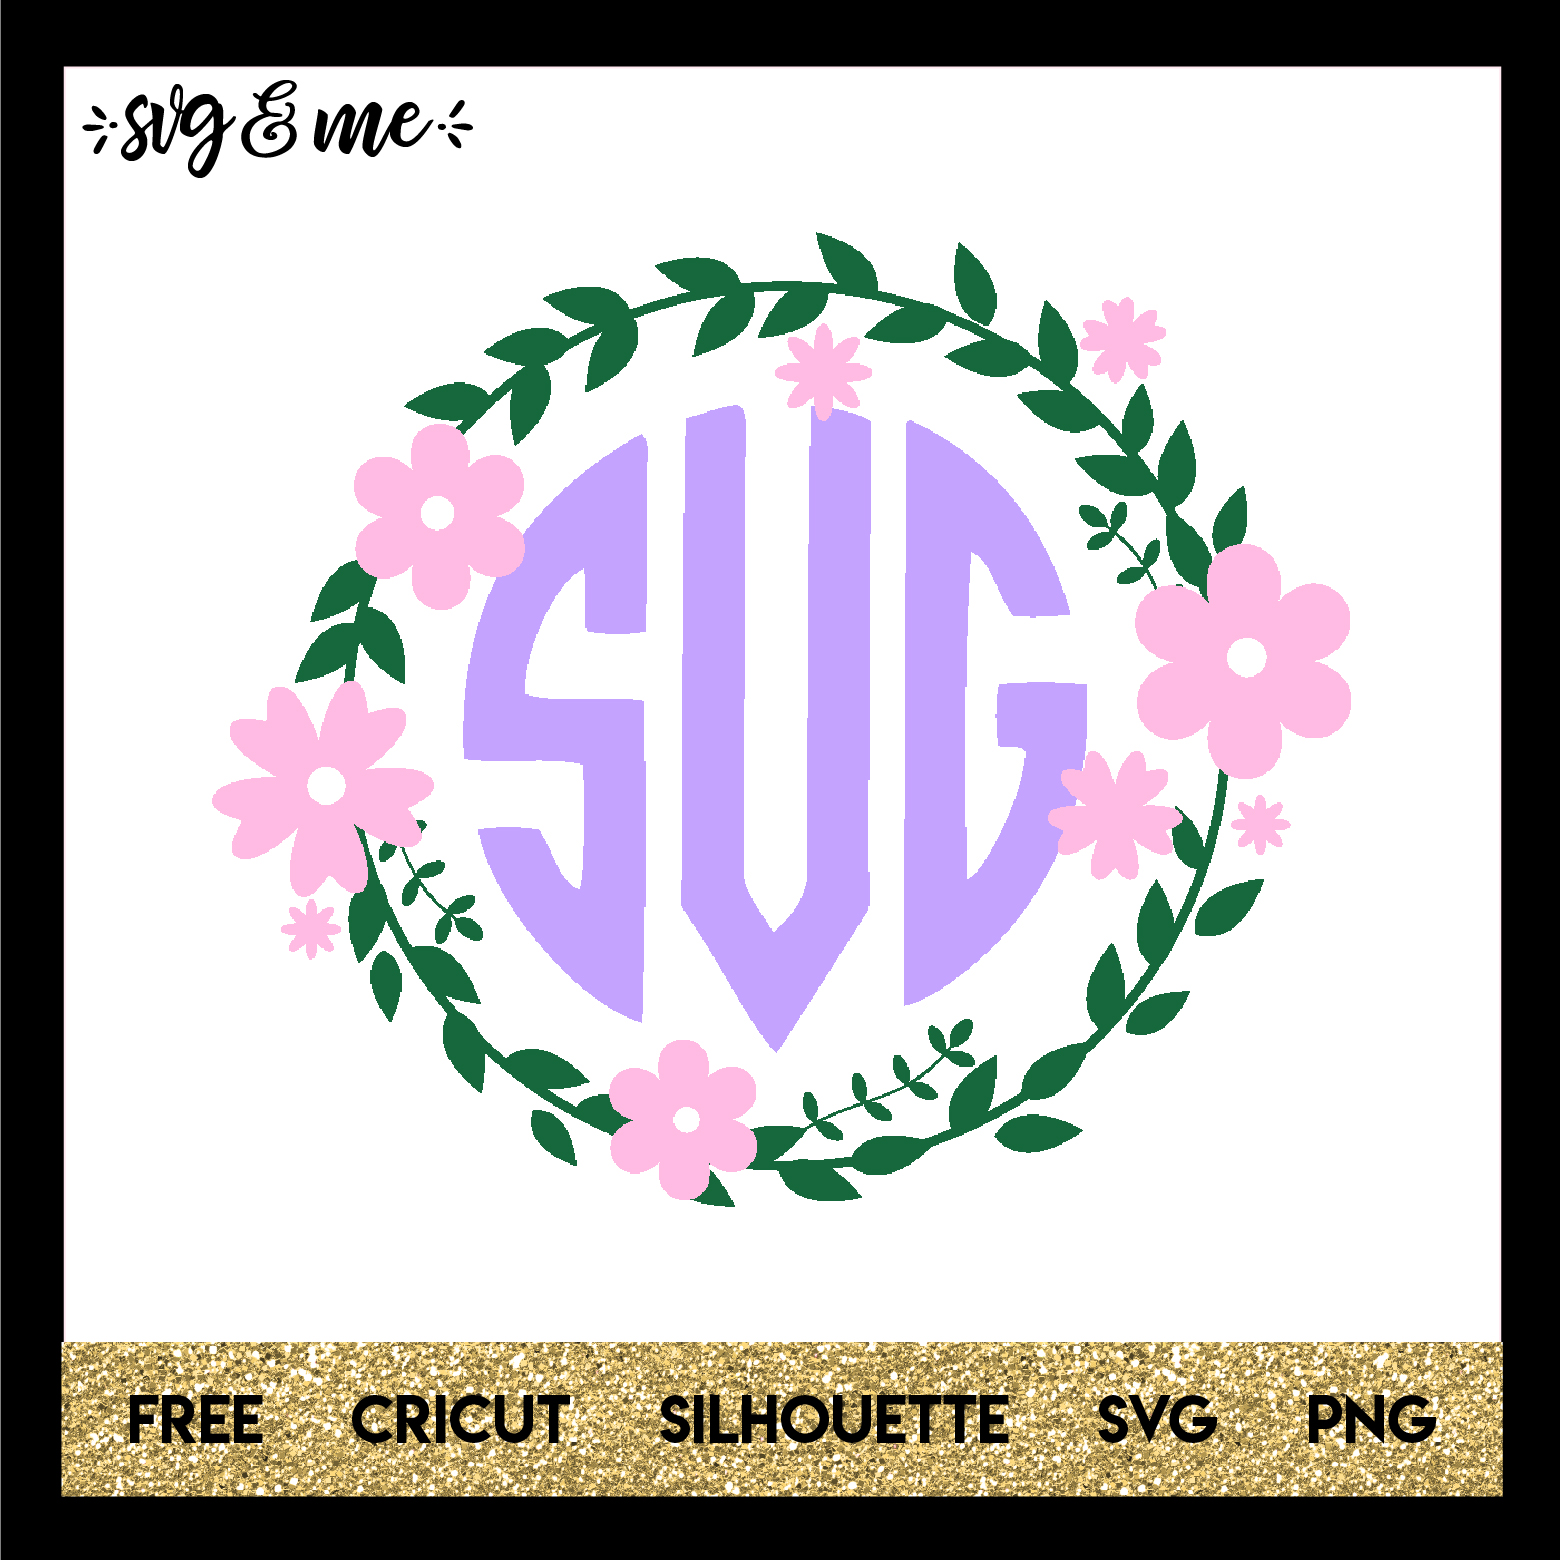 FREE SVG CUT FILE for Cricut, Silhouette and more - Floral Monogram Wreath SVG